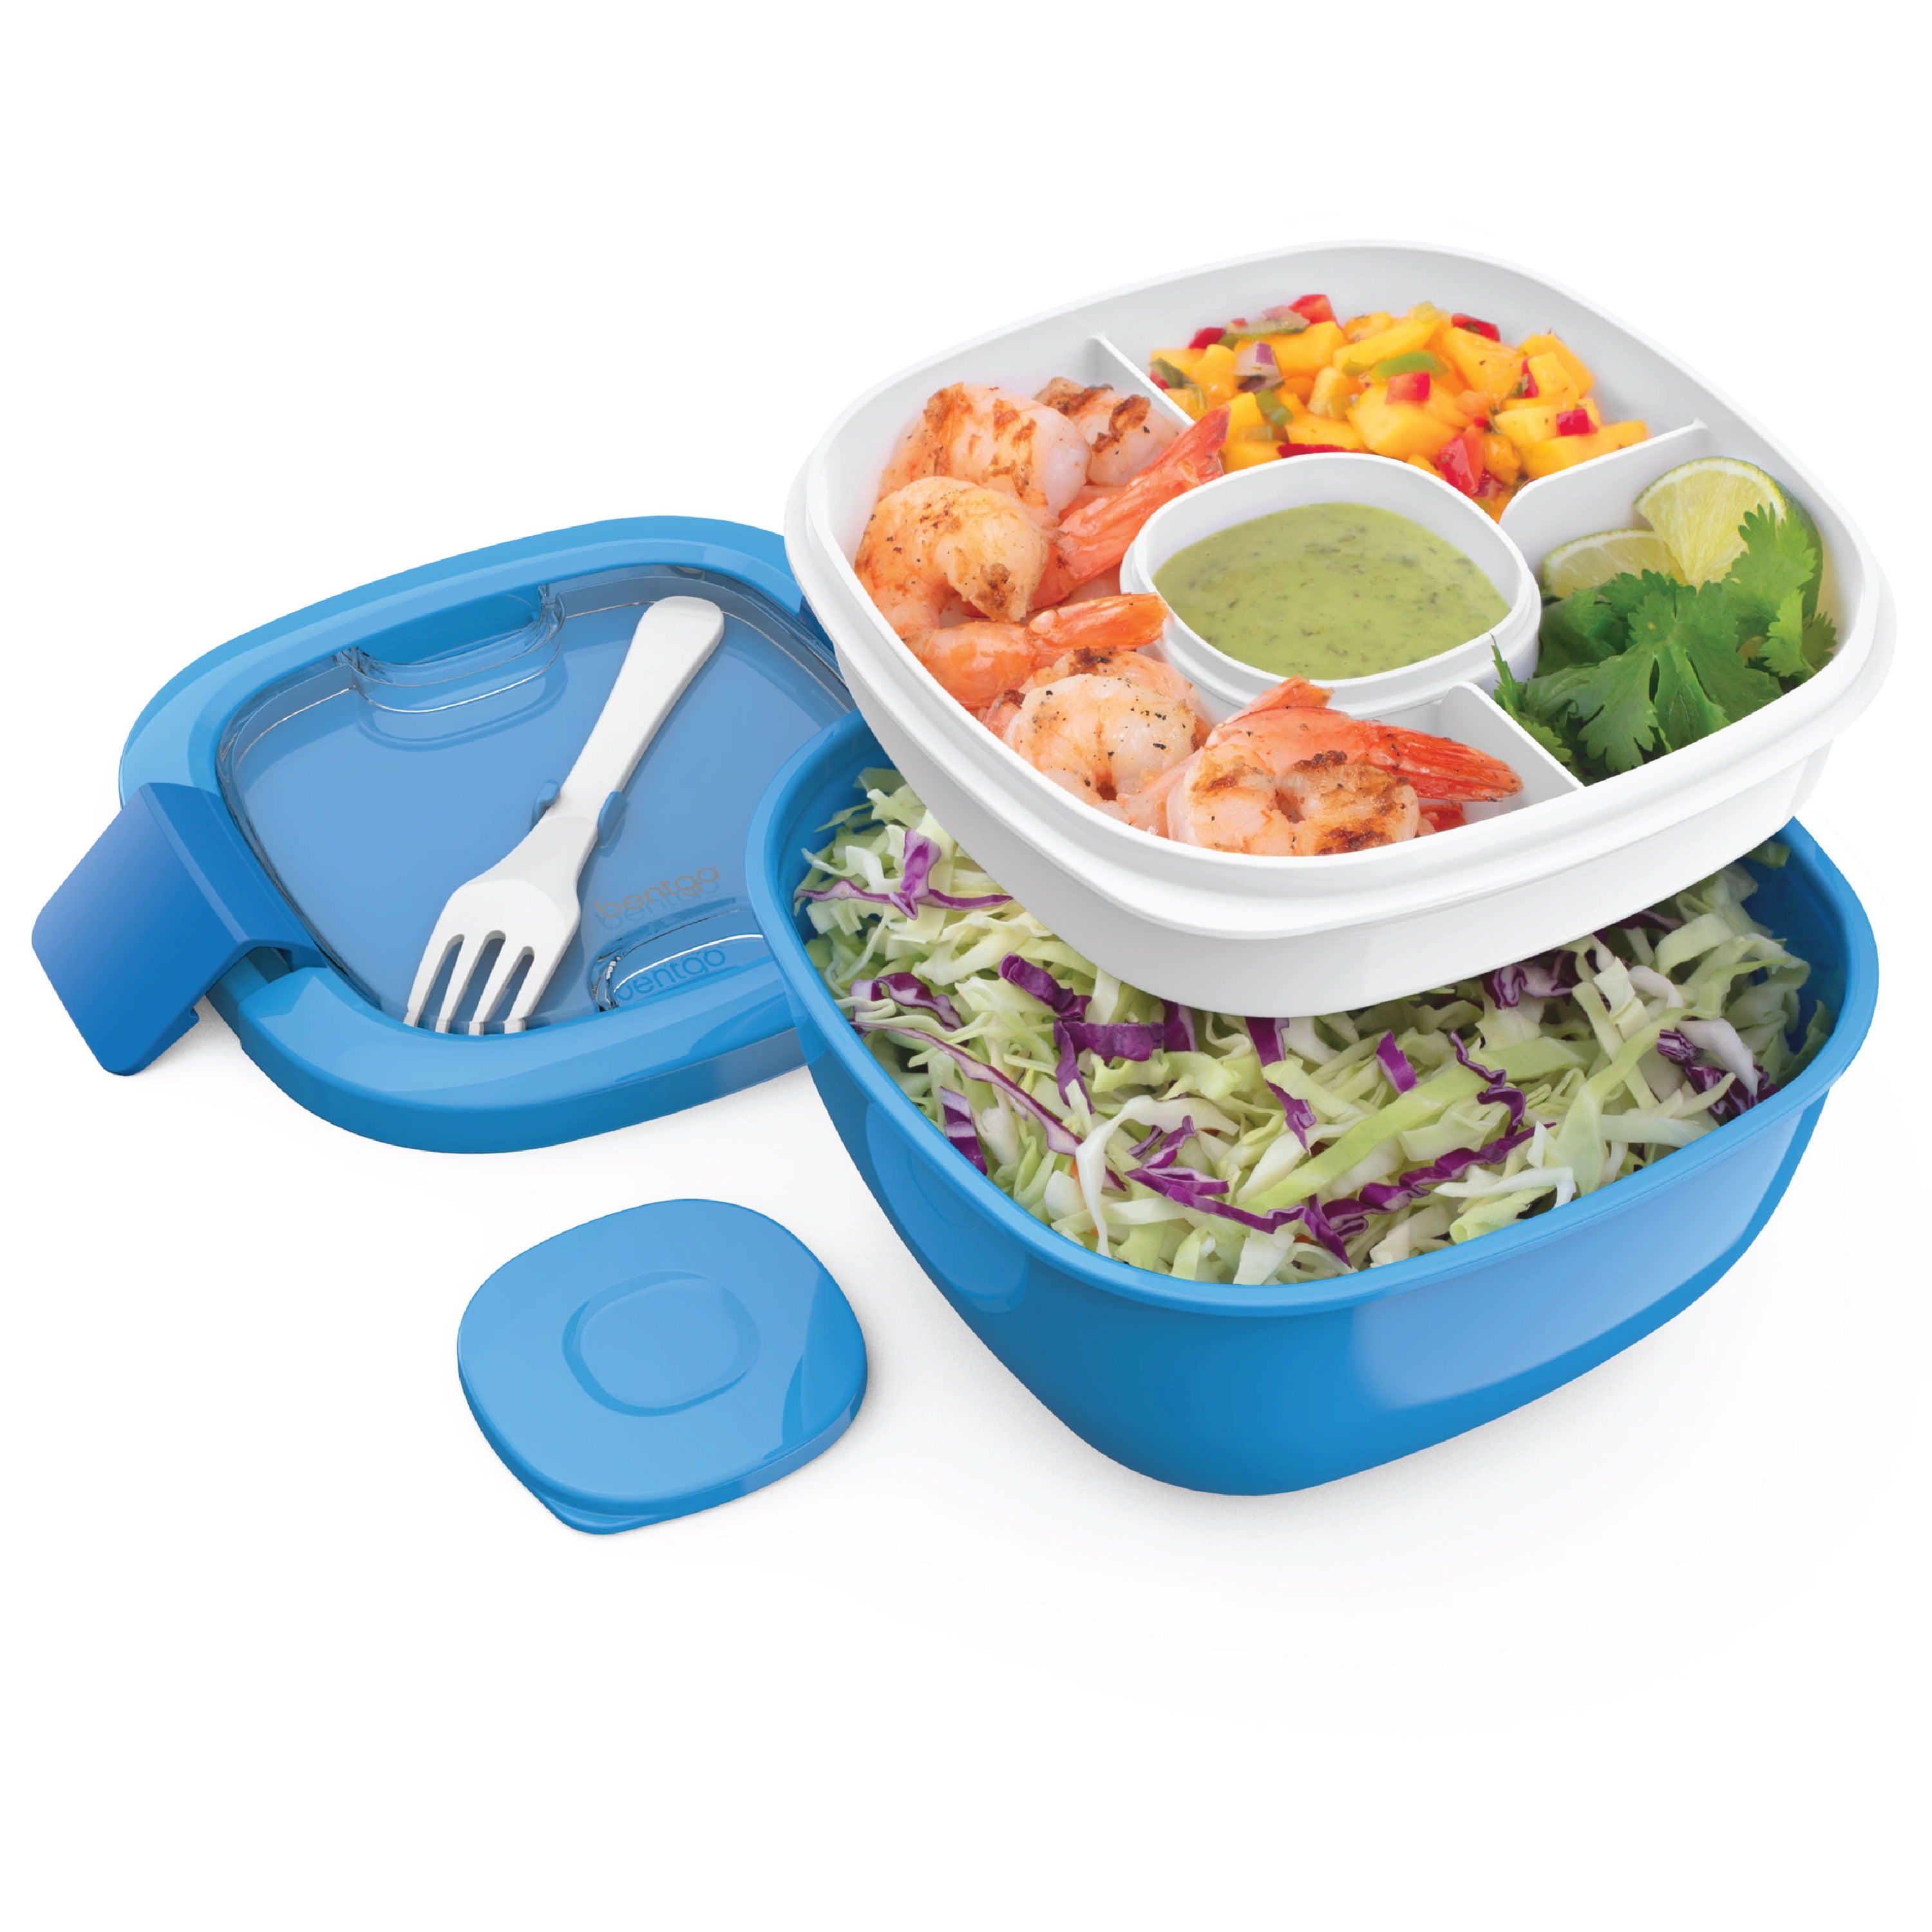 Bentgo® Salad - Stackable Lunch Container with Large 54-oz Salad Bowl,  4-Compartment Bento-Style Tray for Toppings, 3-oz Sauce Container for